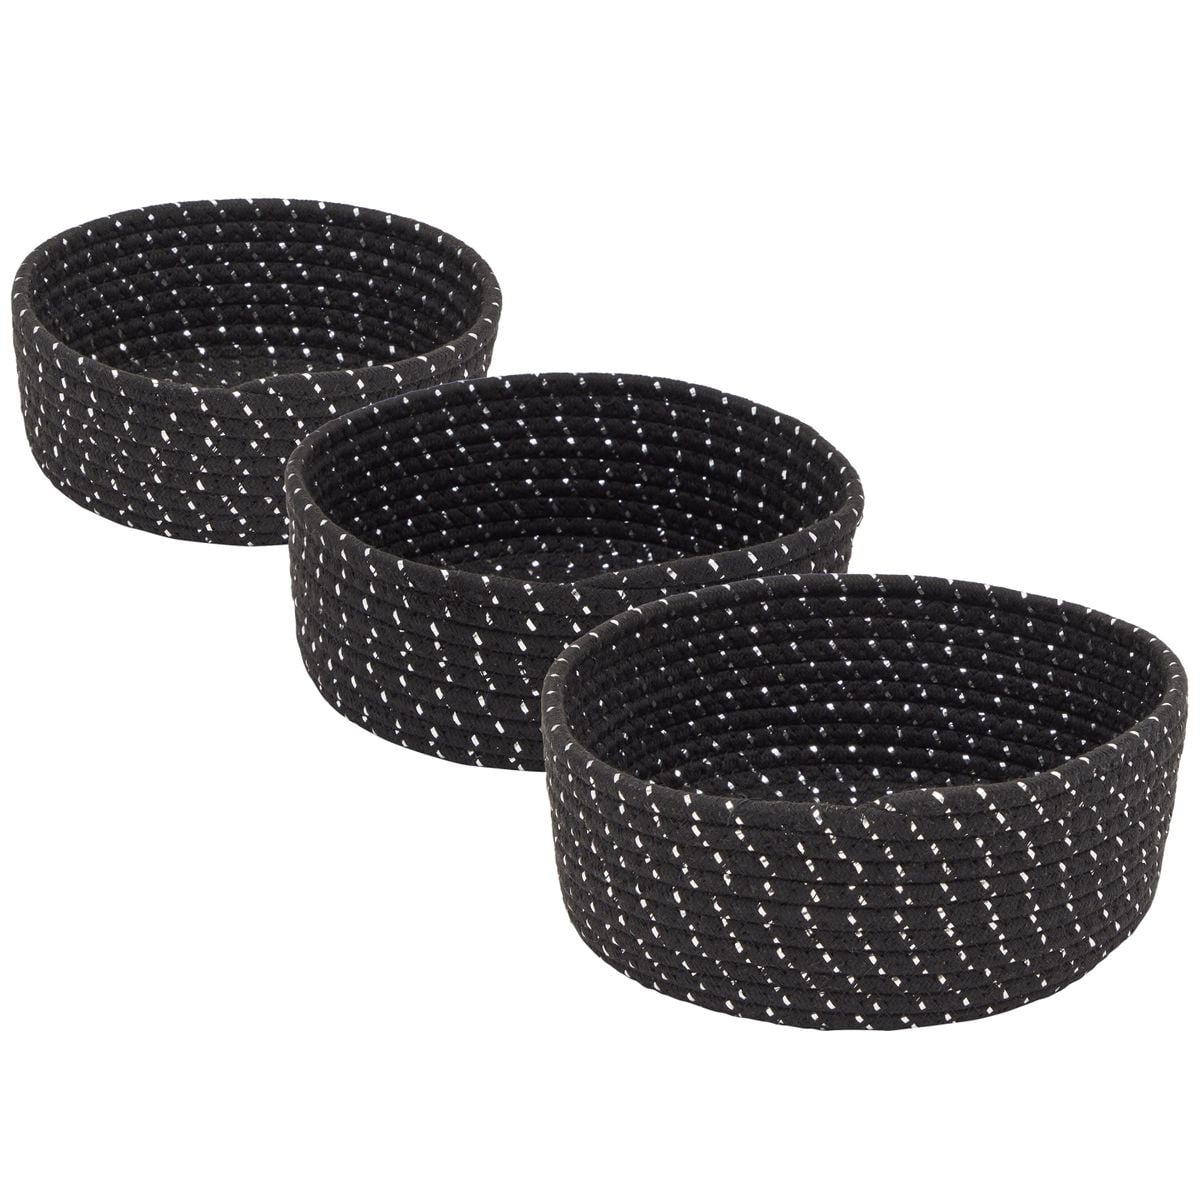 Collapsi 3-Pack Cotton Rope Baskets Decorative Hampers Details about   Woven Storage Baskets 